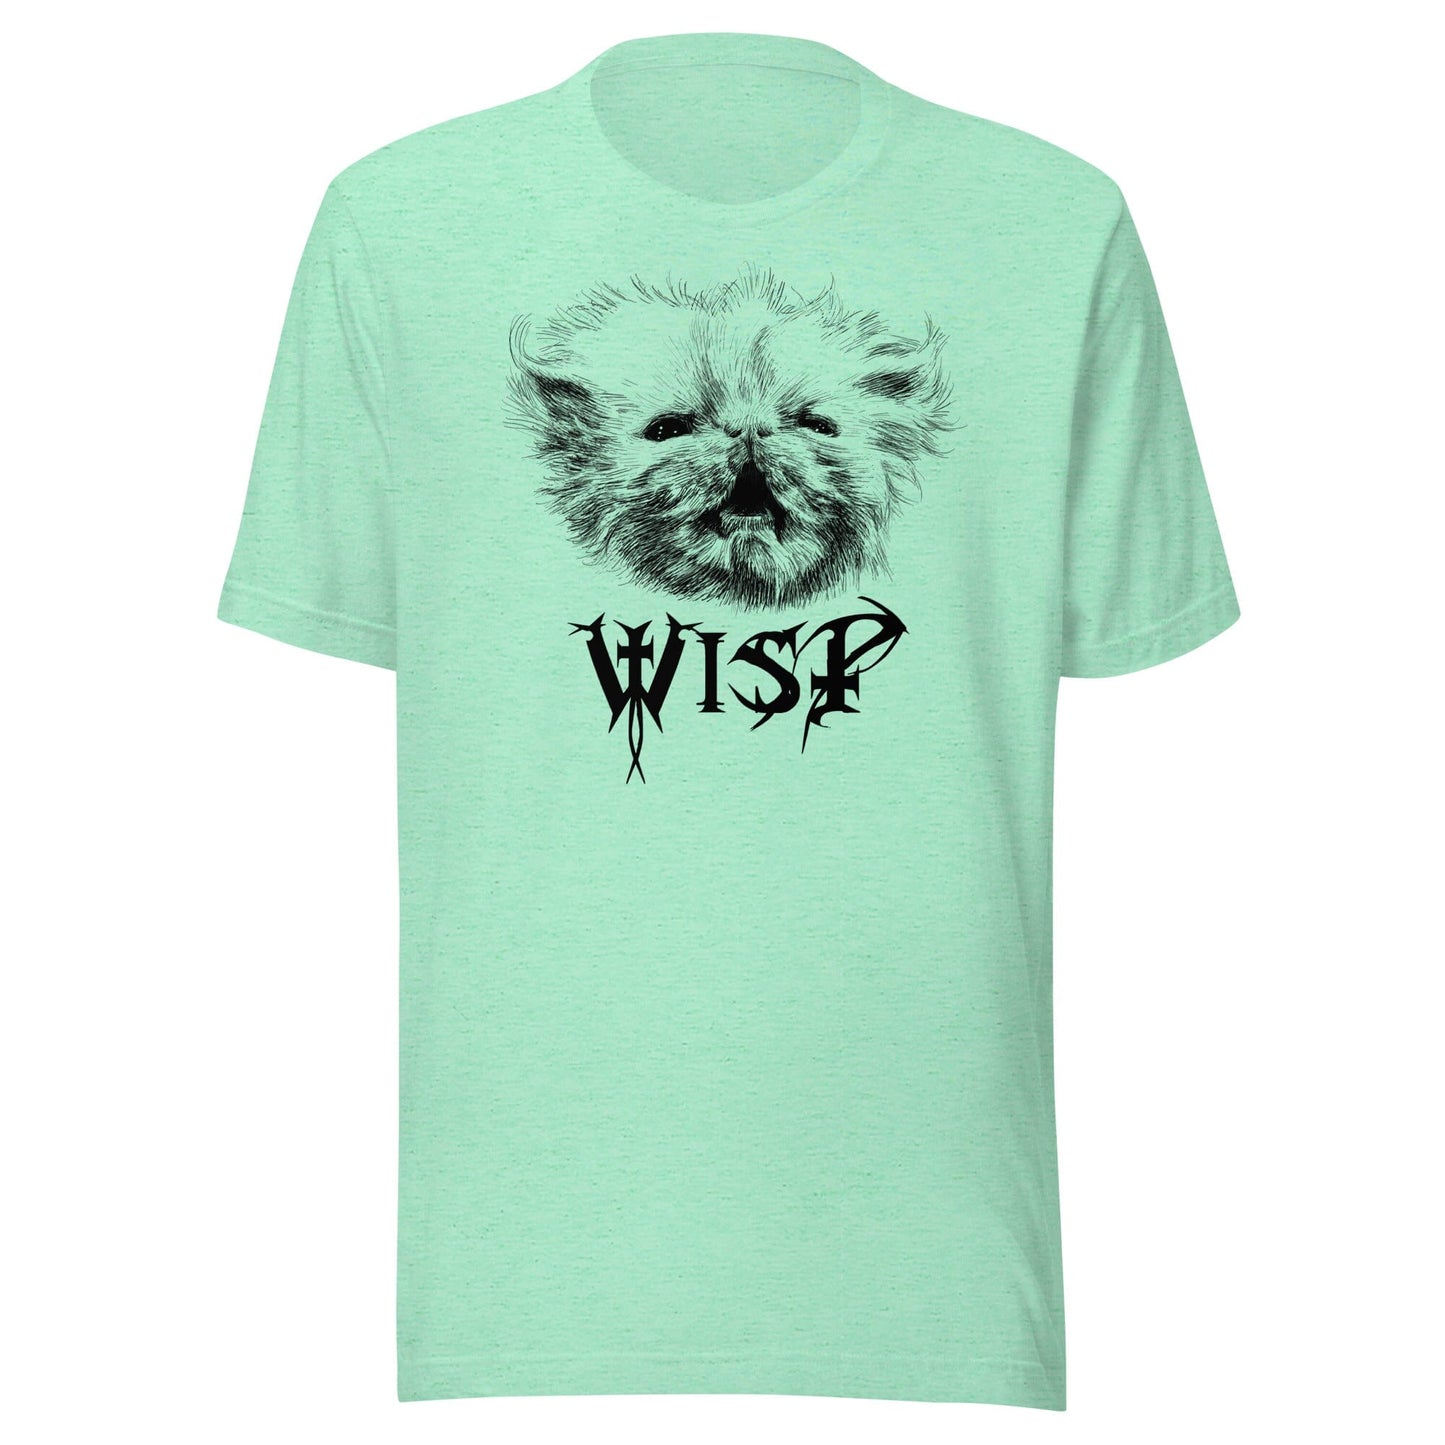 Metal Wisp T-Shirt [Unfoiled] (All net proceeds go to Rags to Riches Animal Rescue) JoyousJoyfulJoyness Heather Mint S 